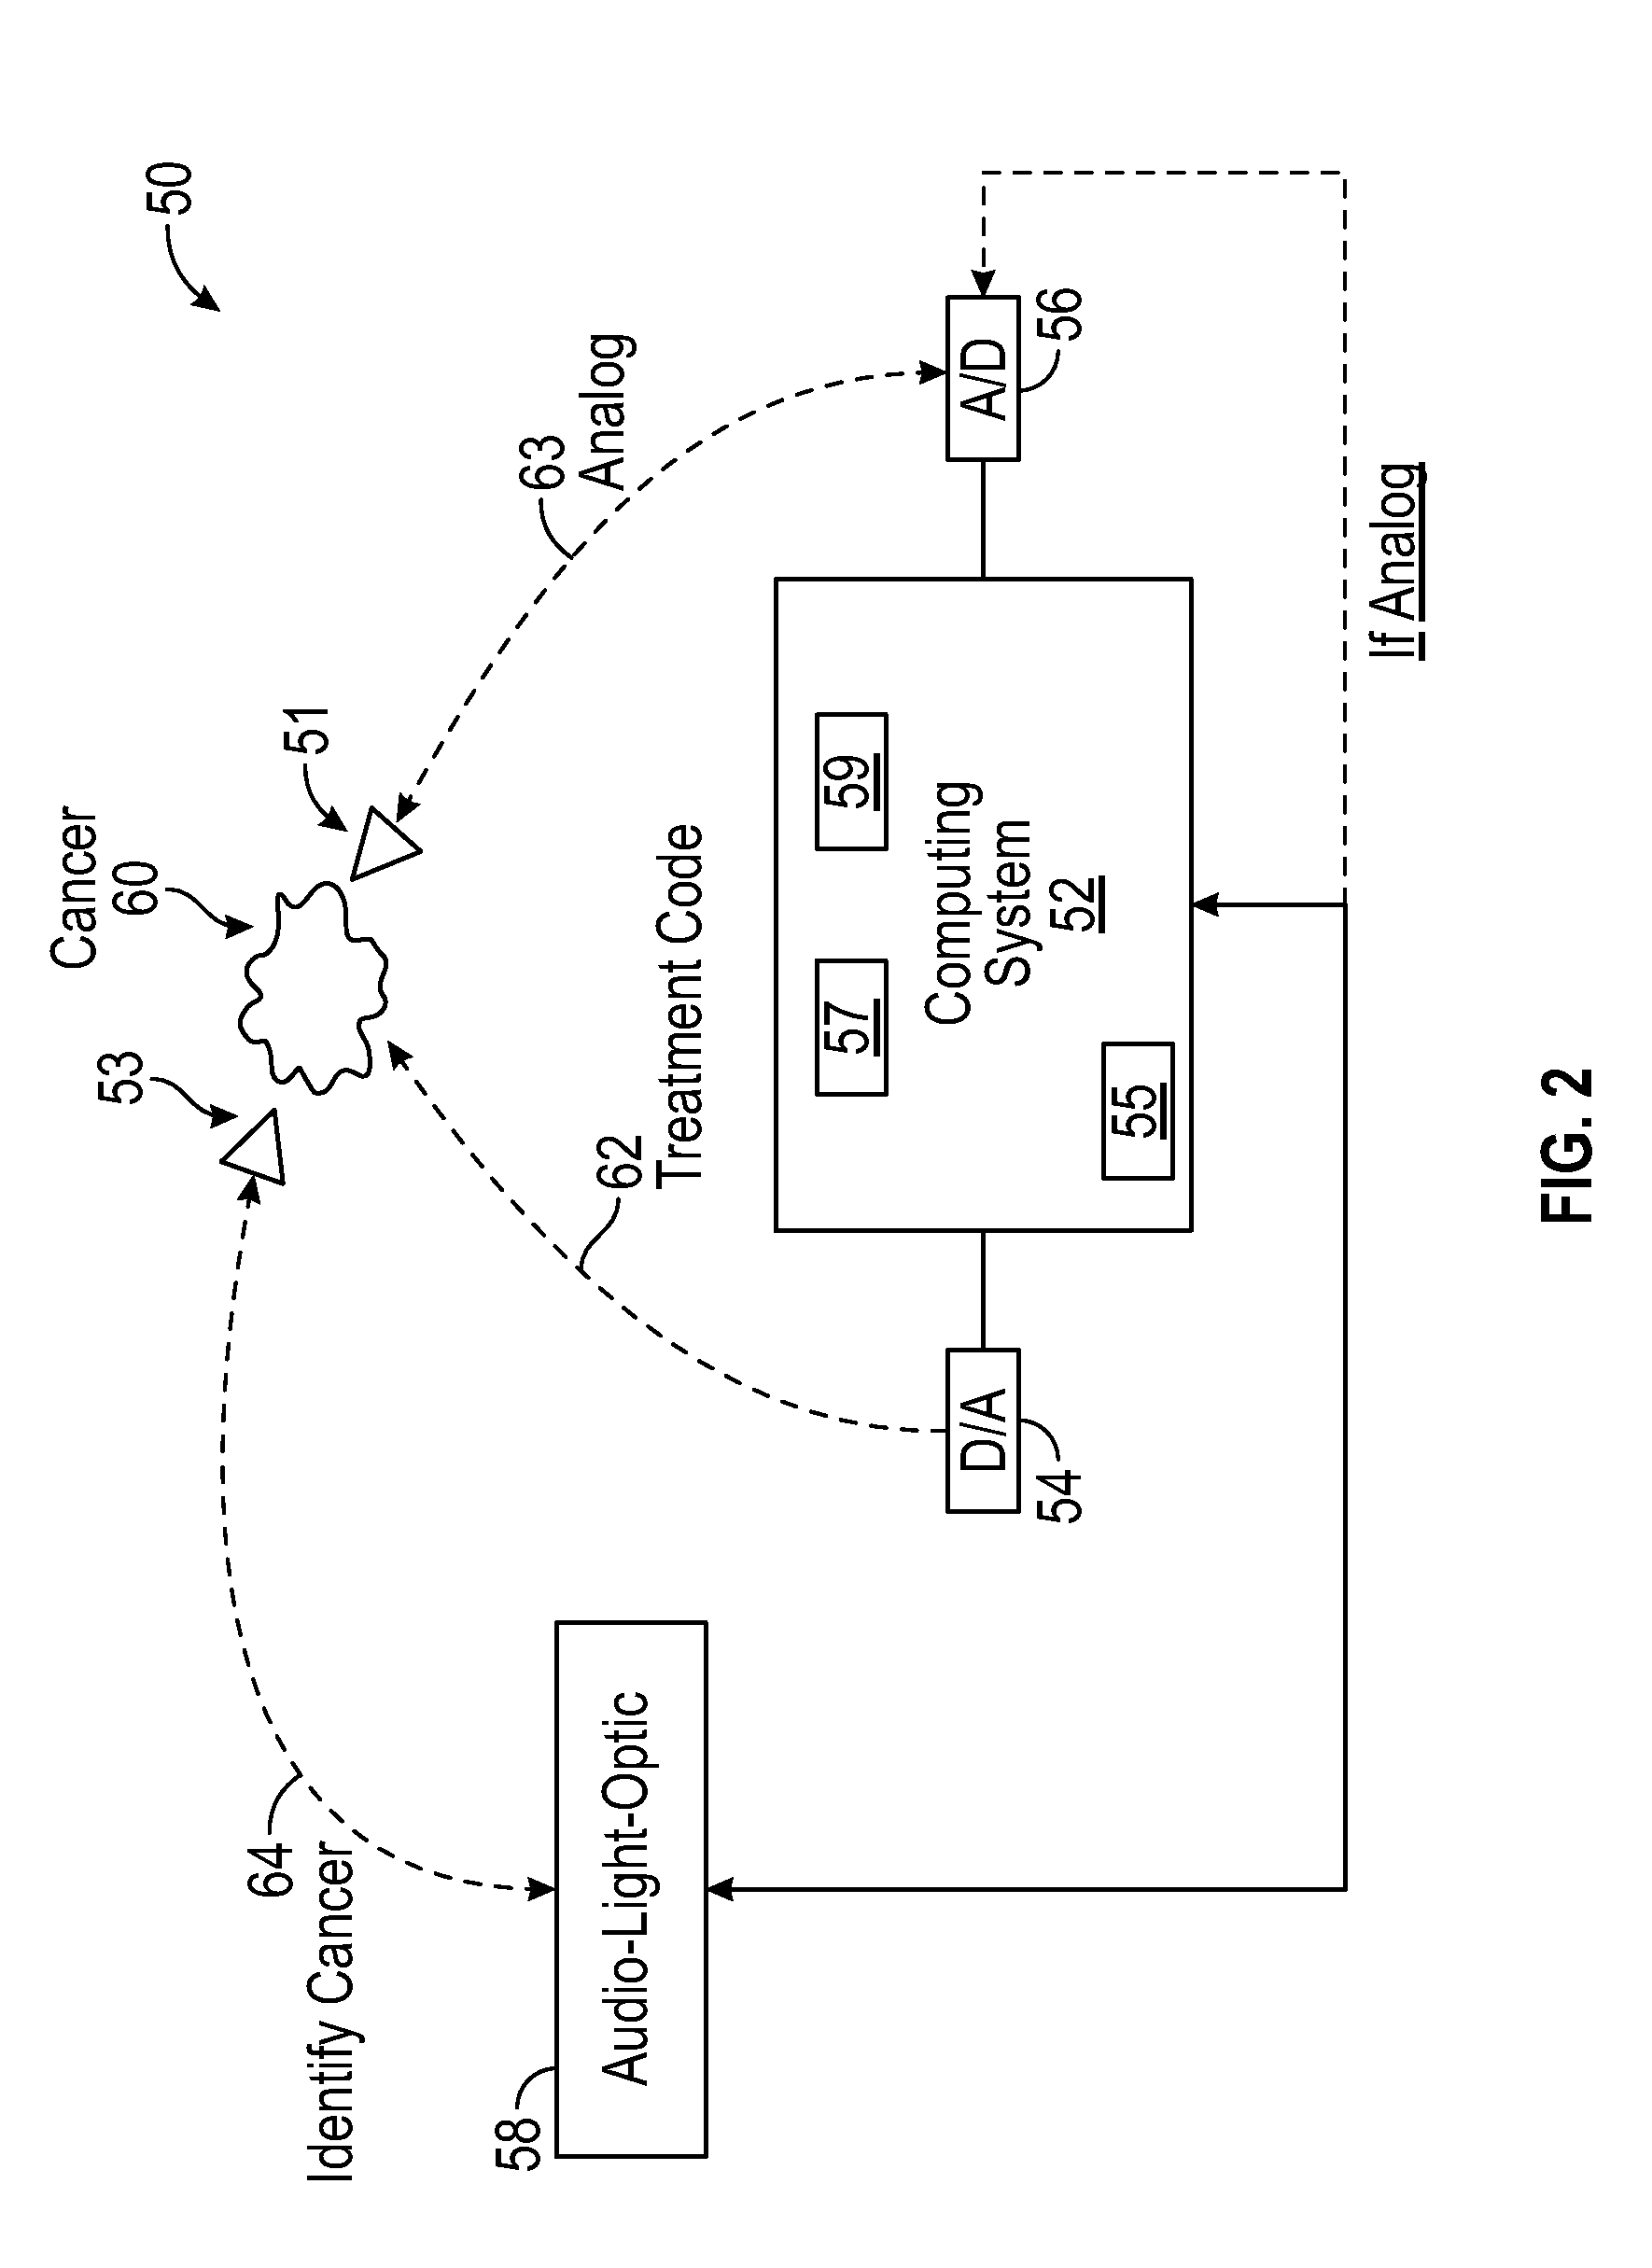 Bioelectronic signal processor and procedure to locate and destroy pancreatic cancer cells